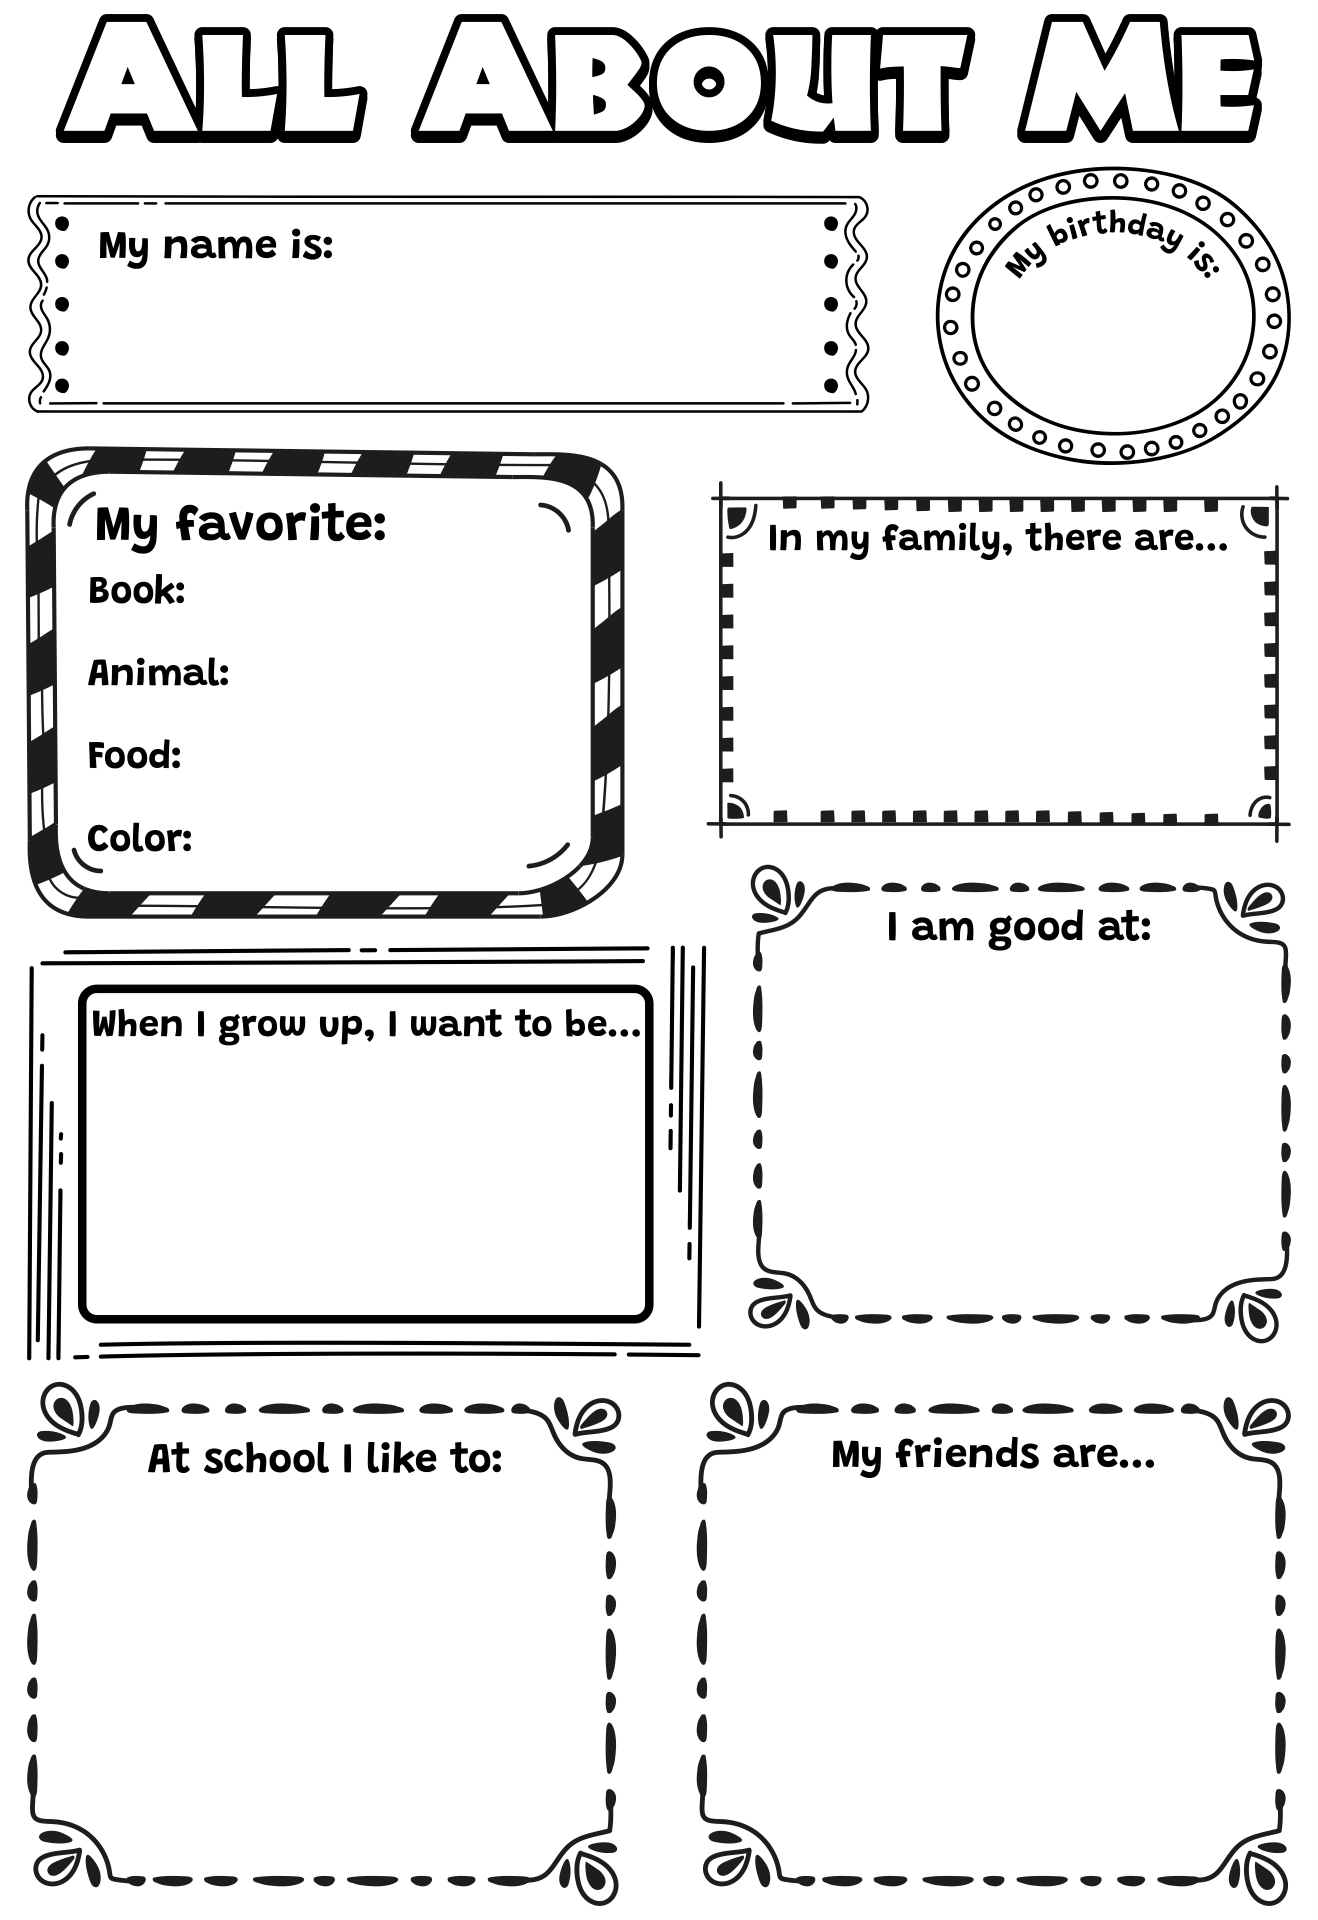 About.me Worksheets Printable